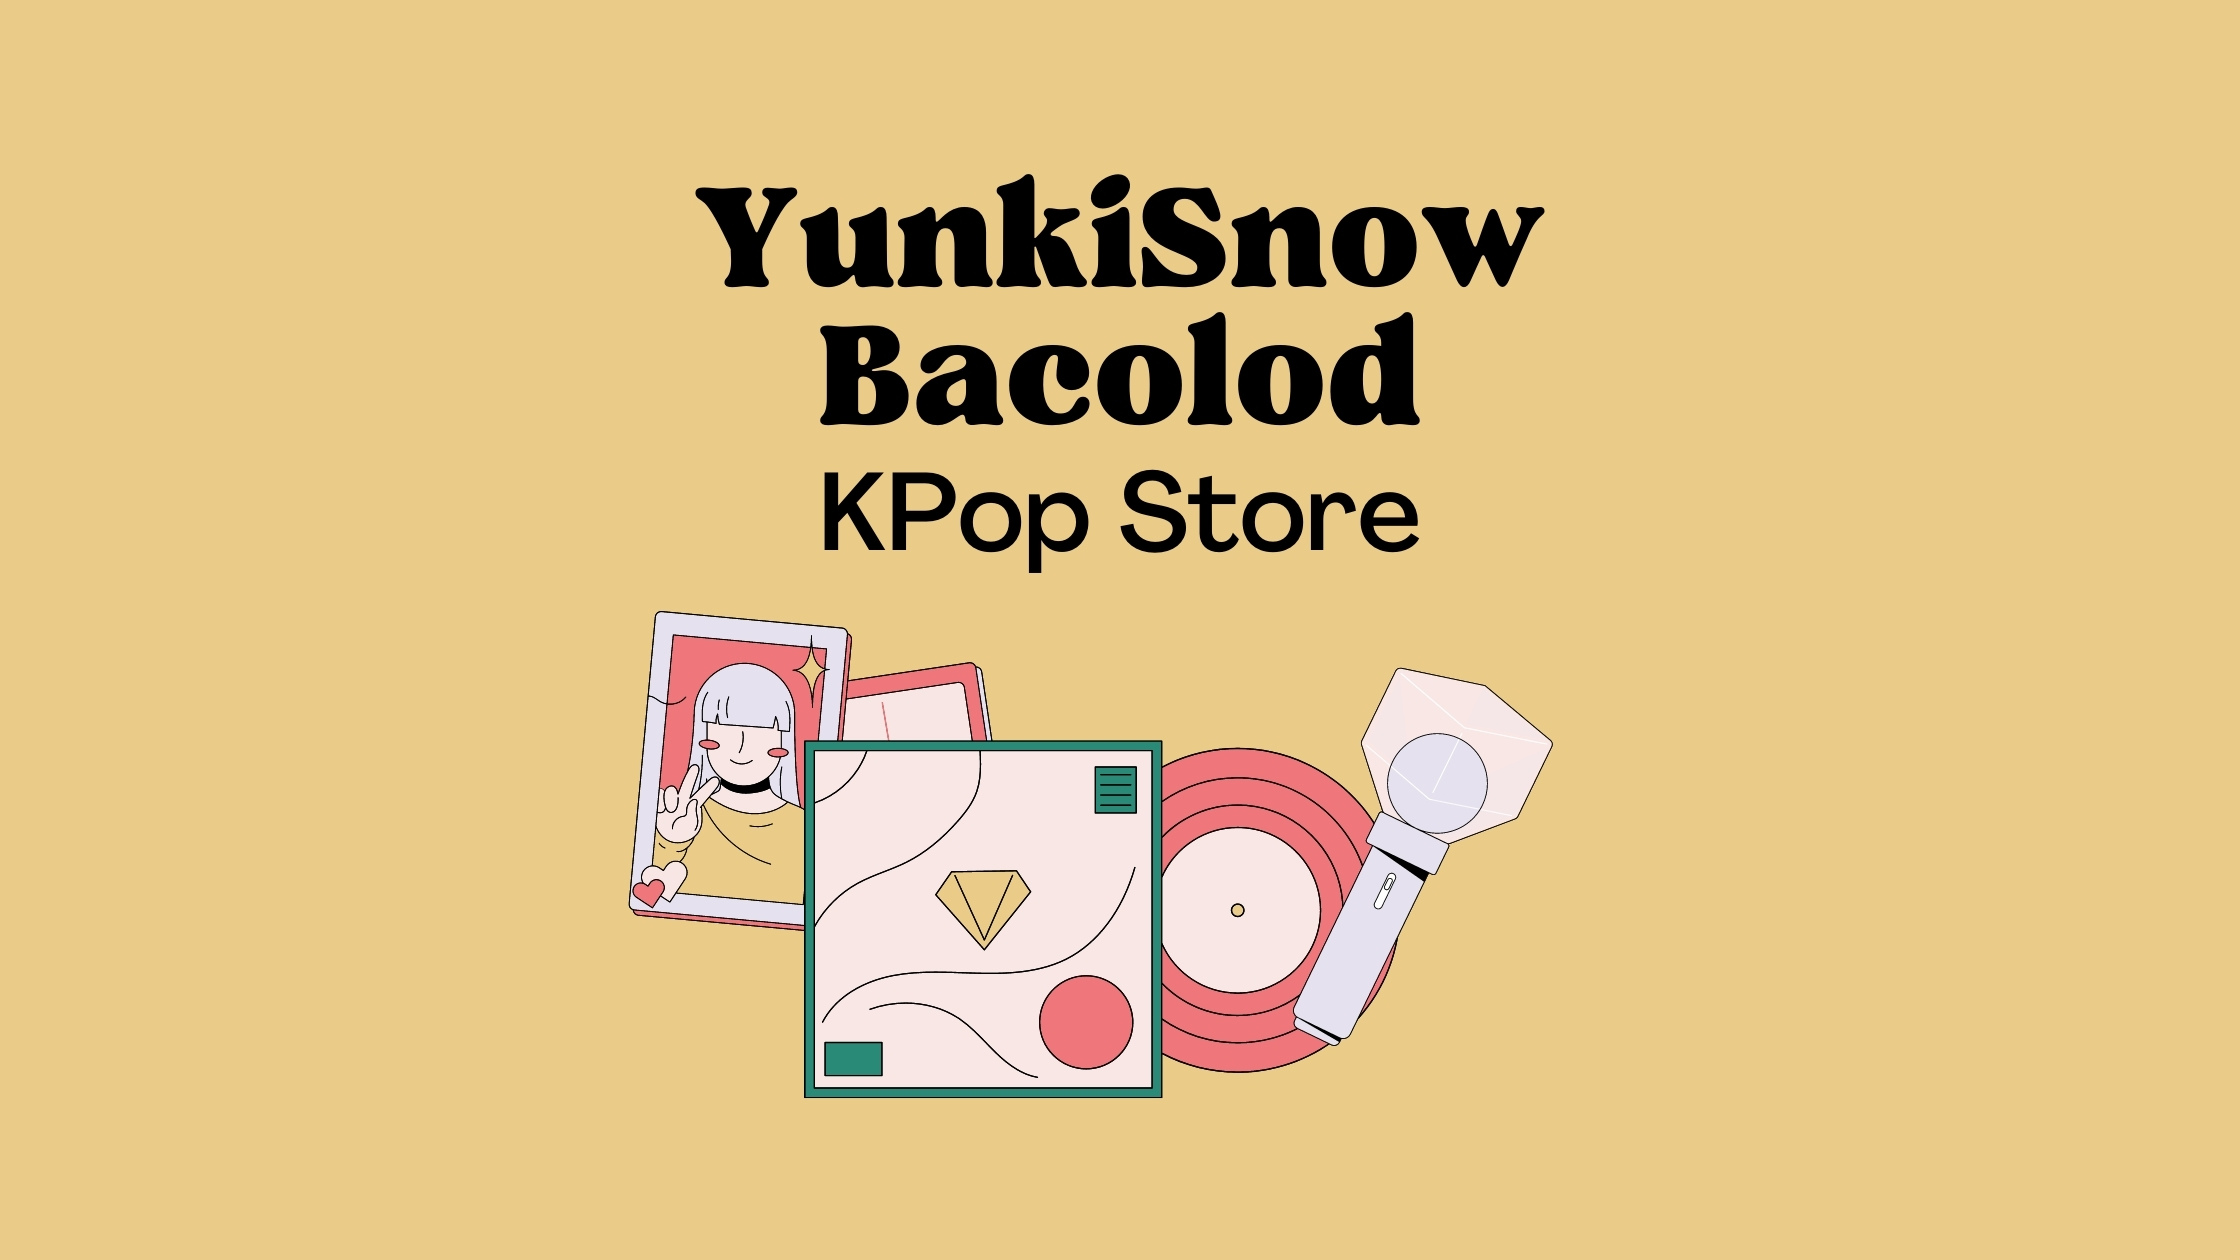 yunkisnow-bacolod-kpop-store-bacolod